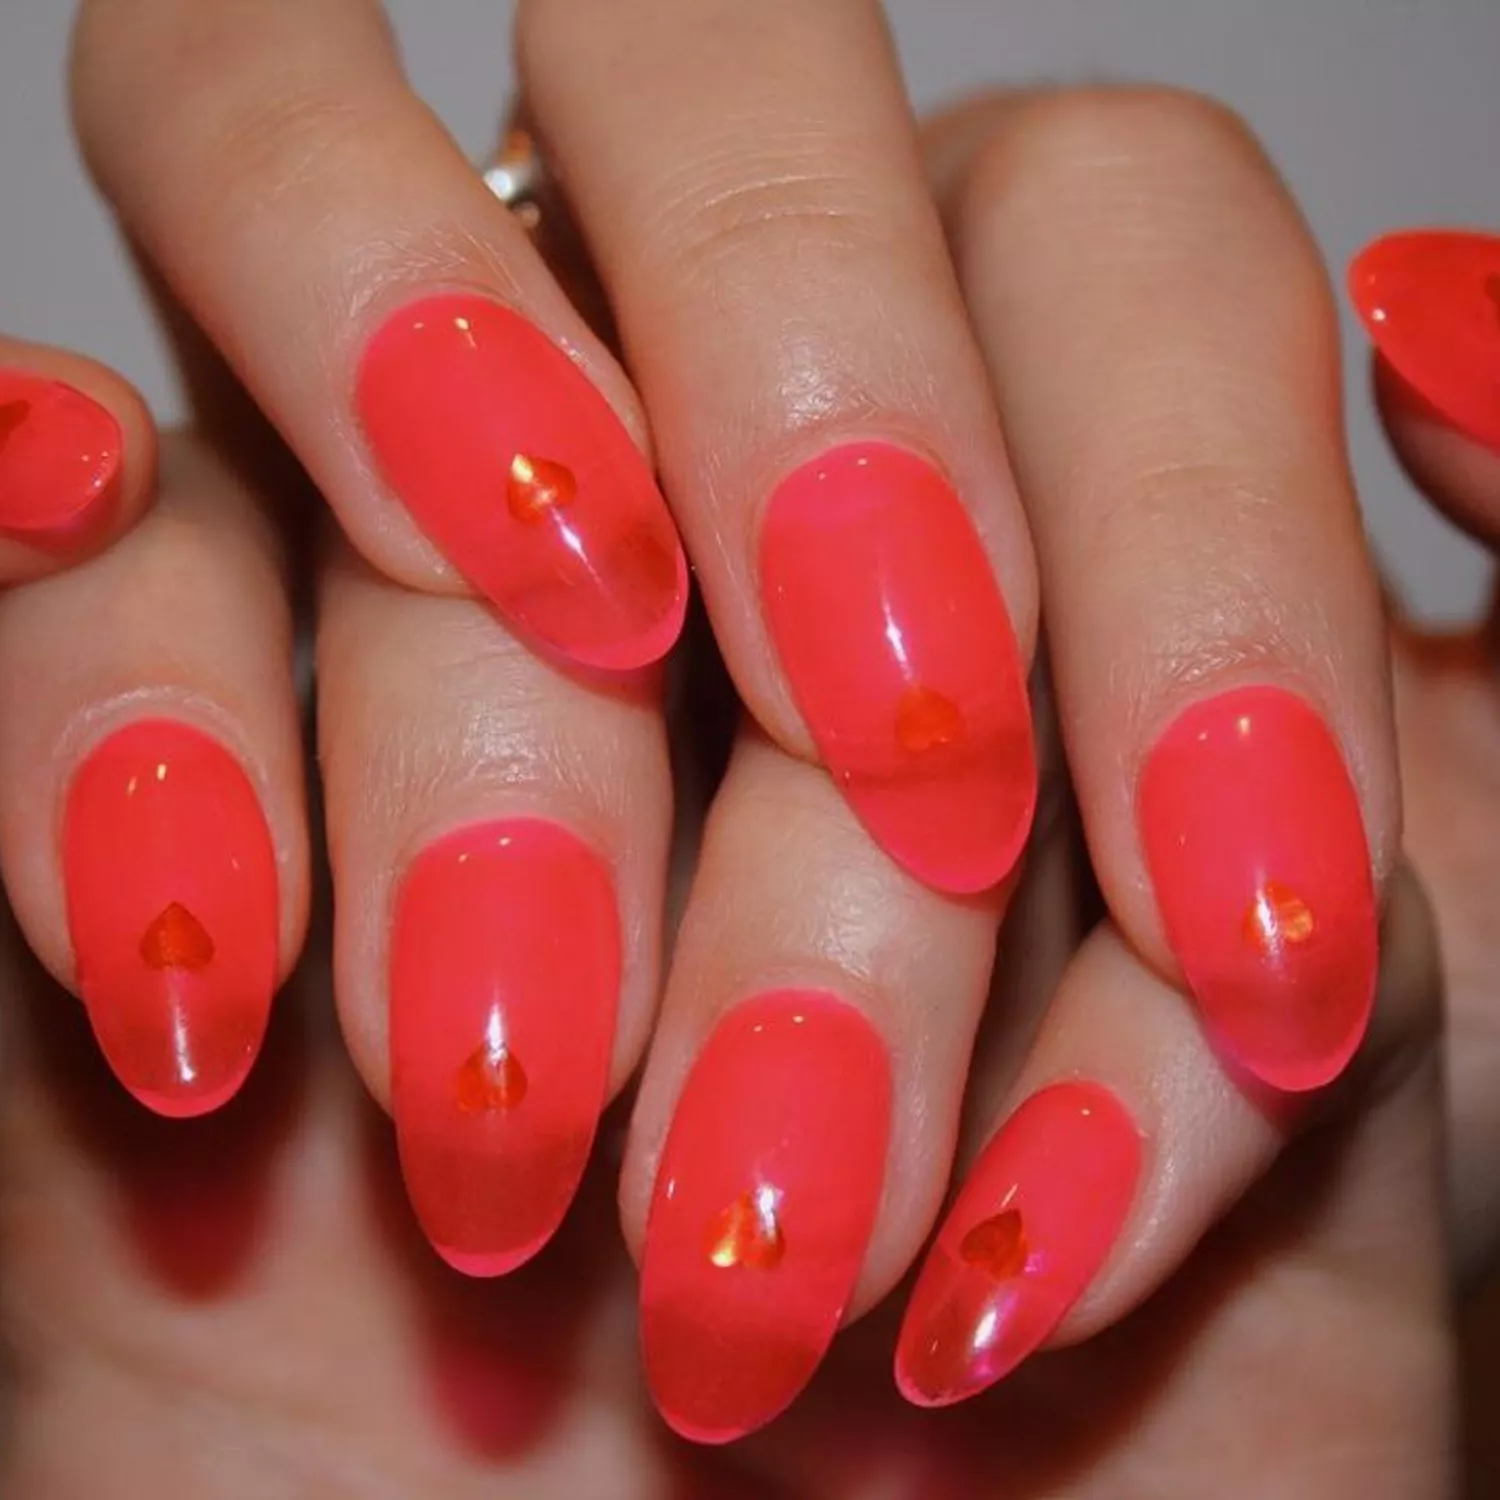 A neon spritz manicure on oval nails, viewed up close